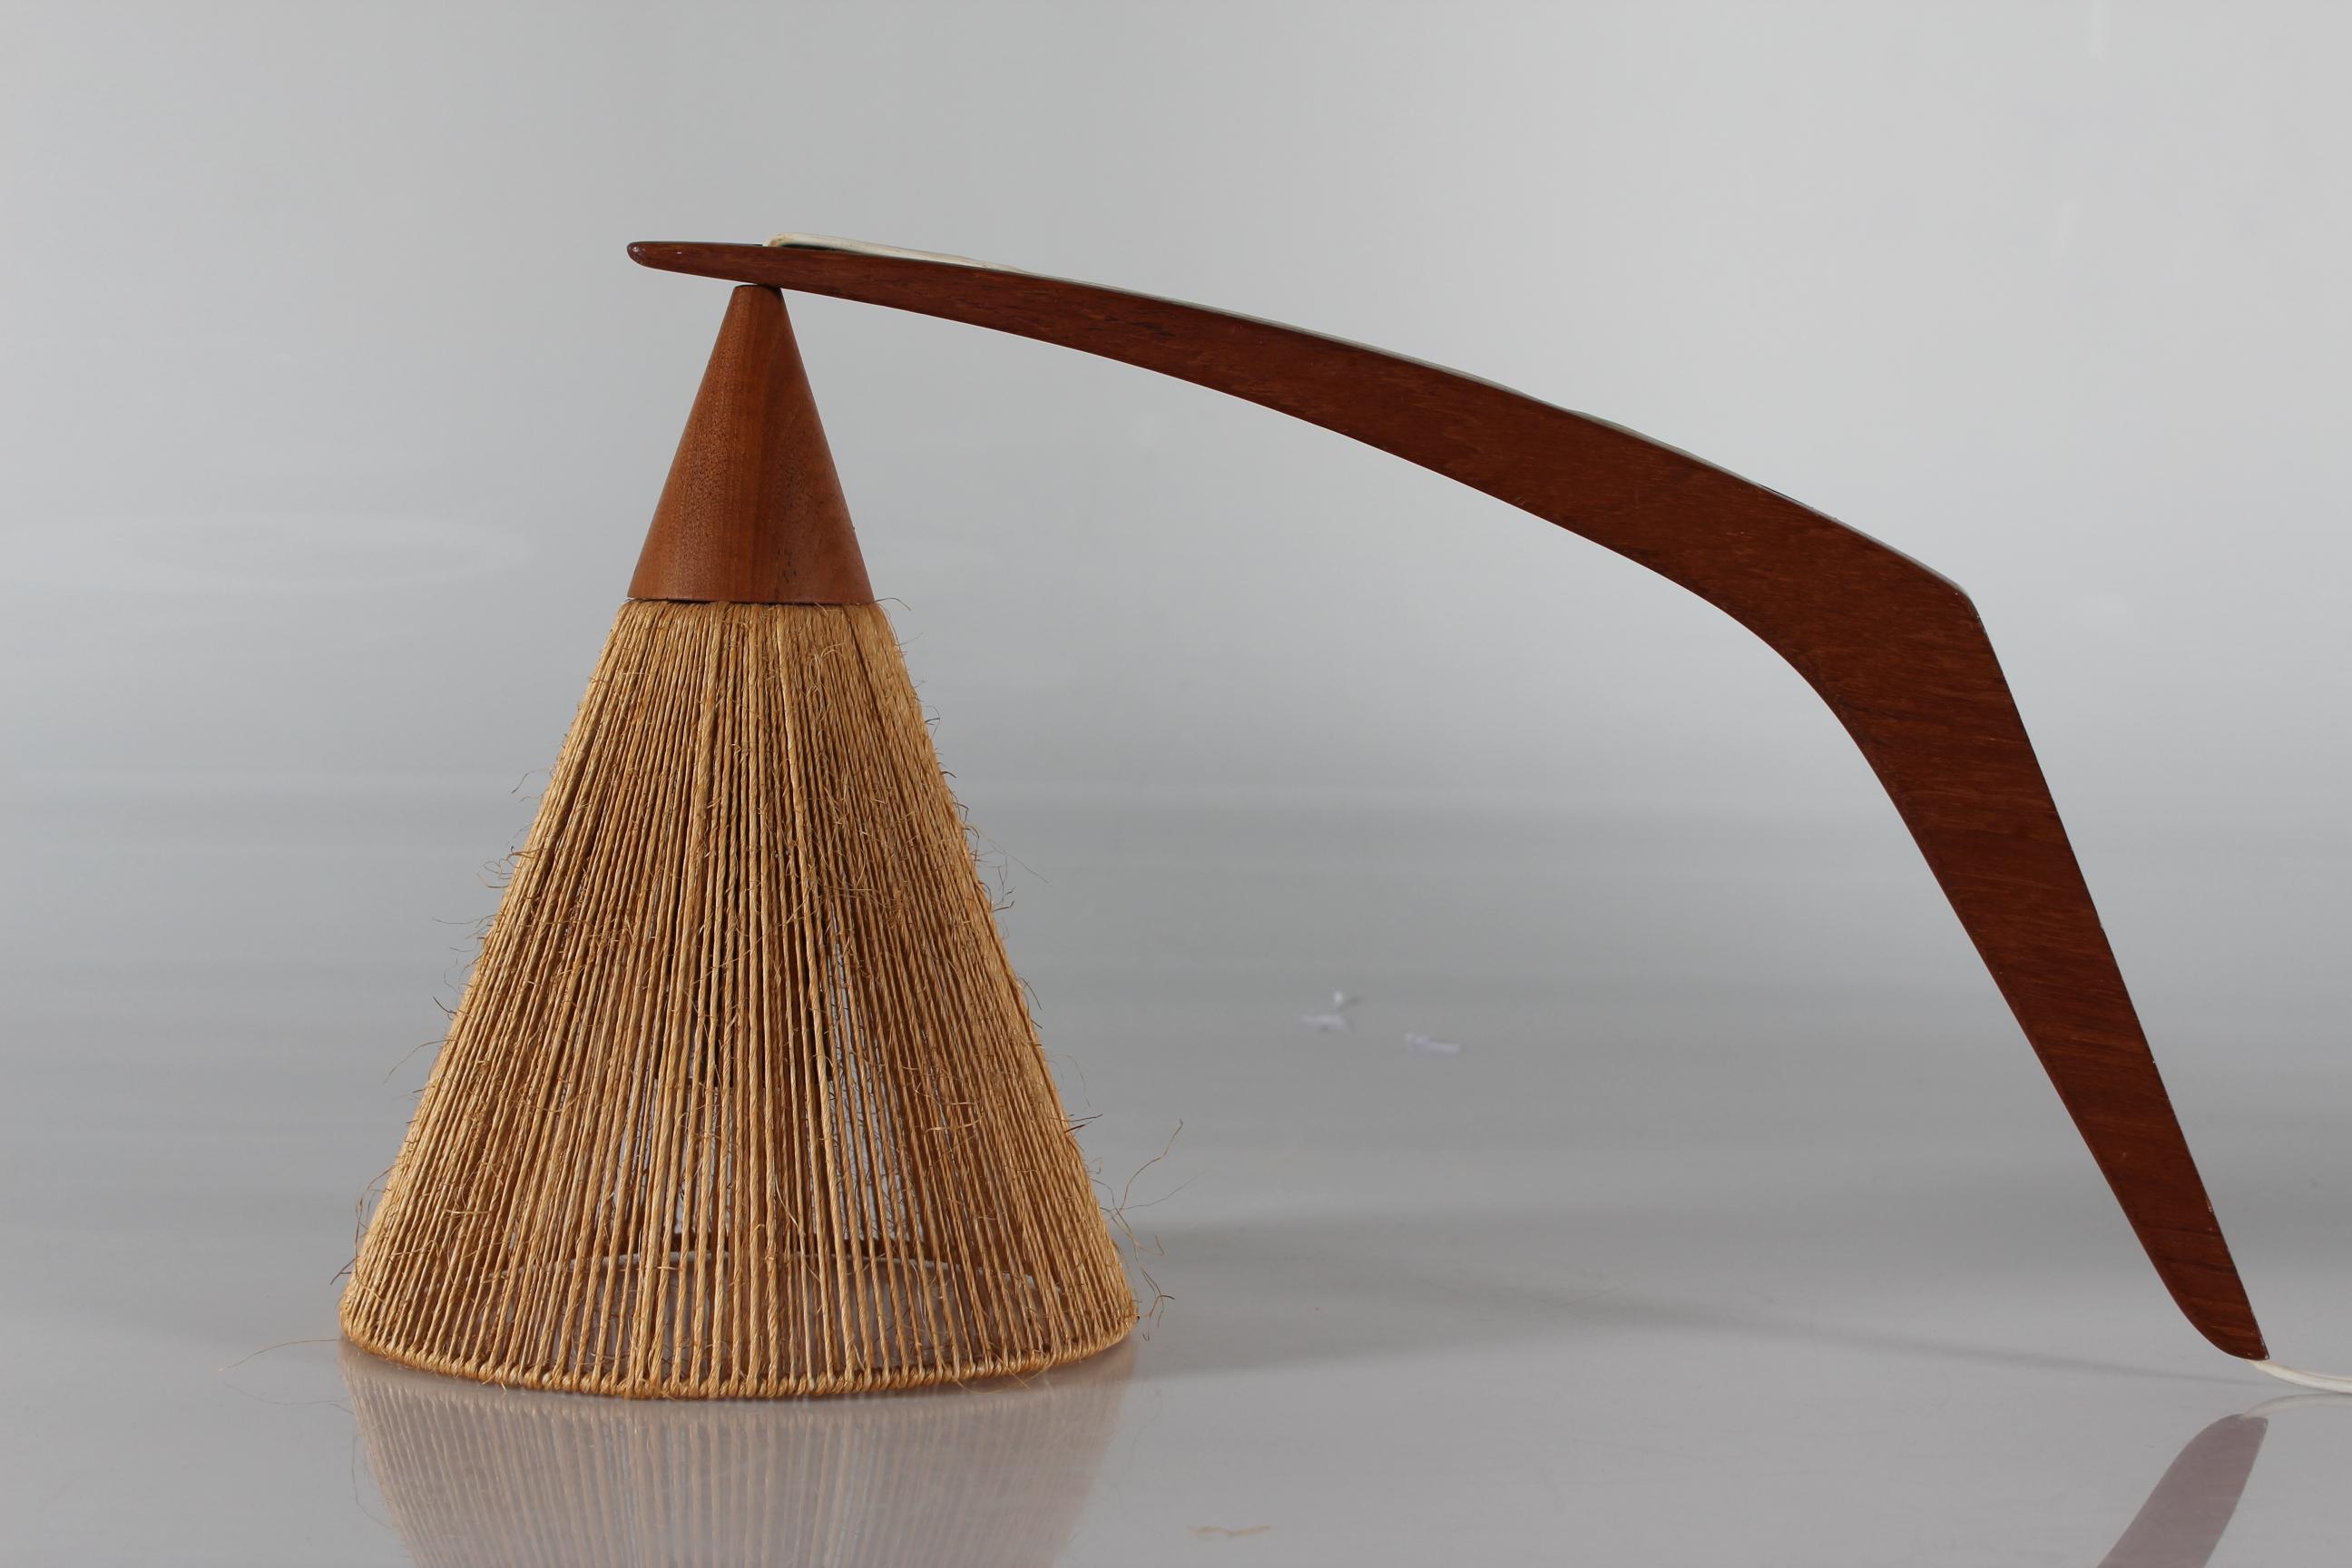 Vintage wall lamp by the Danish designer Ib Fabiansen, made by the Danish lamp manufacture Fog & Mørup in Copenhagen in the 1950's.

The wall light has a boomerang shaped arm made of teak mounted with shade made of jute/sisal cord.

Ib Fabiansen